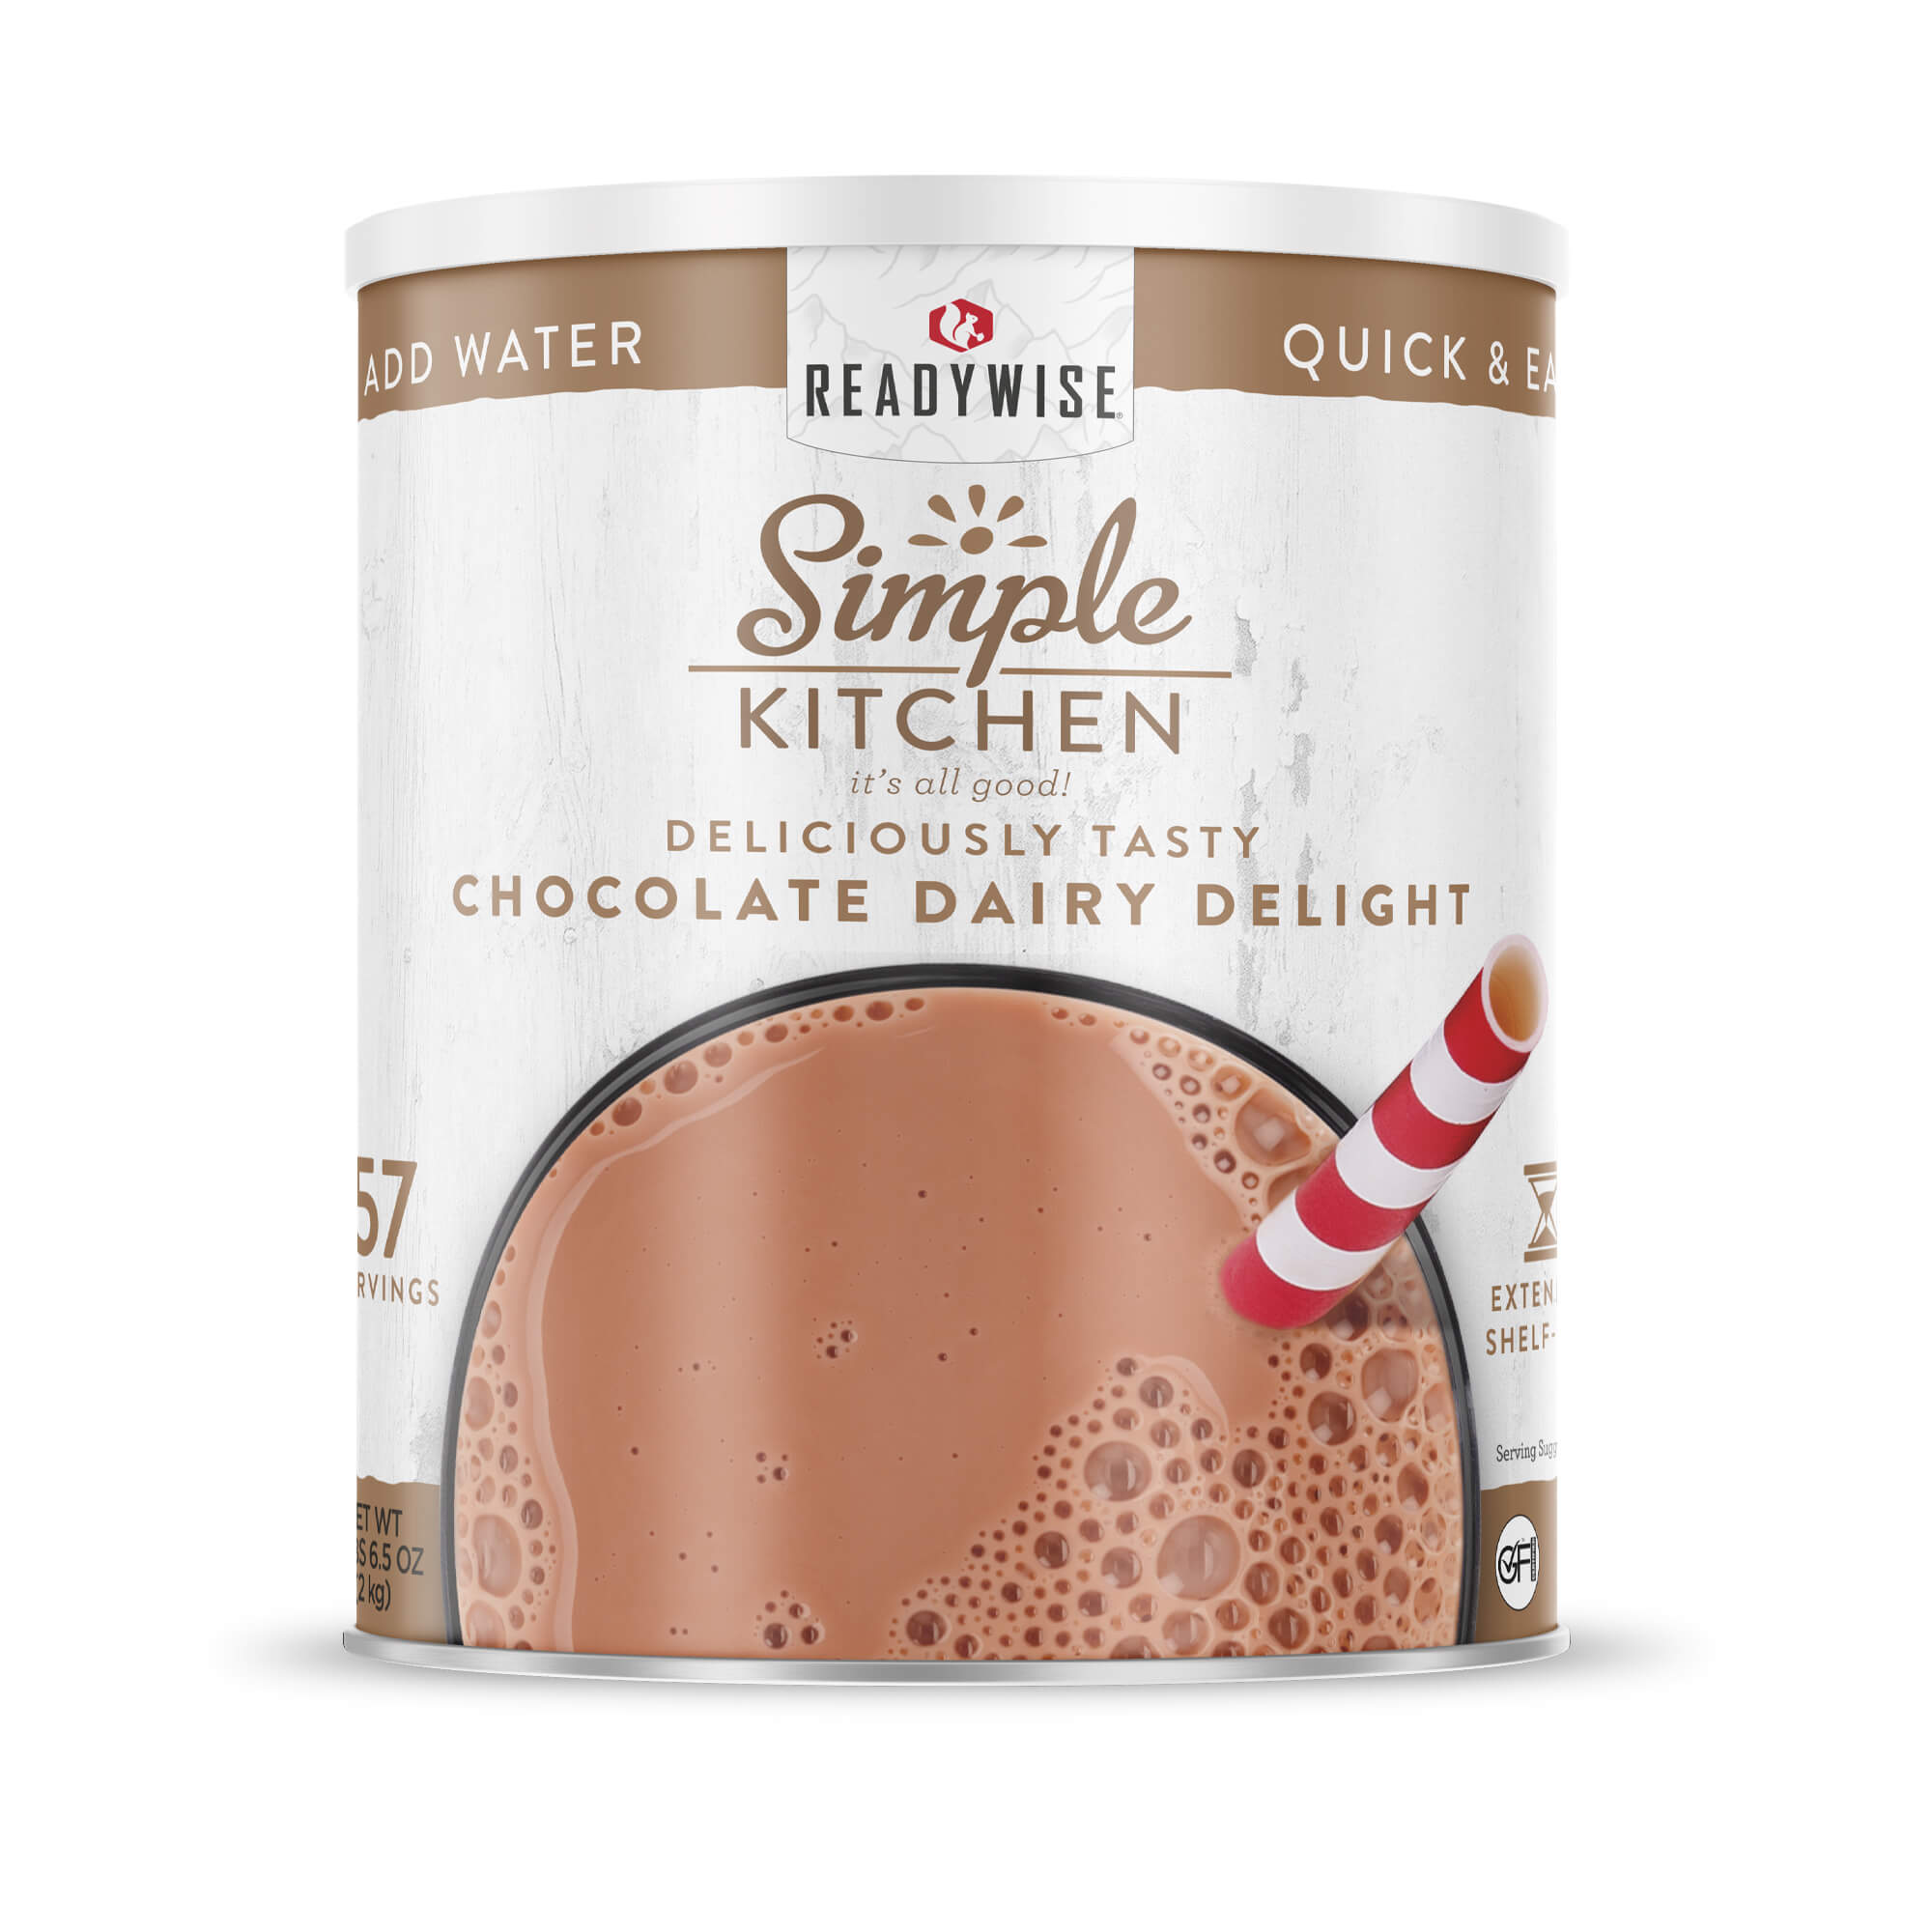 Slate Lactose Free Chocolate Milk: Taste Test and Thoughts